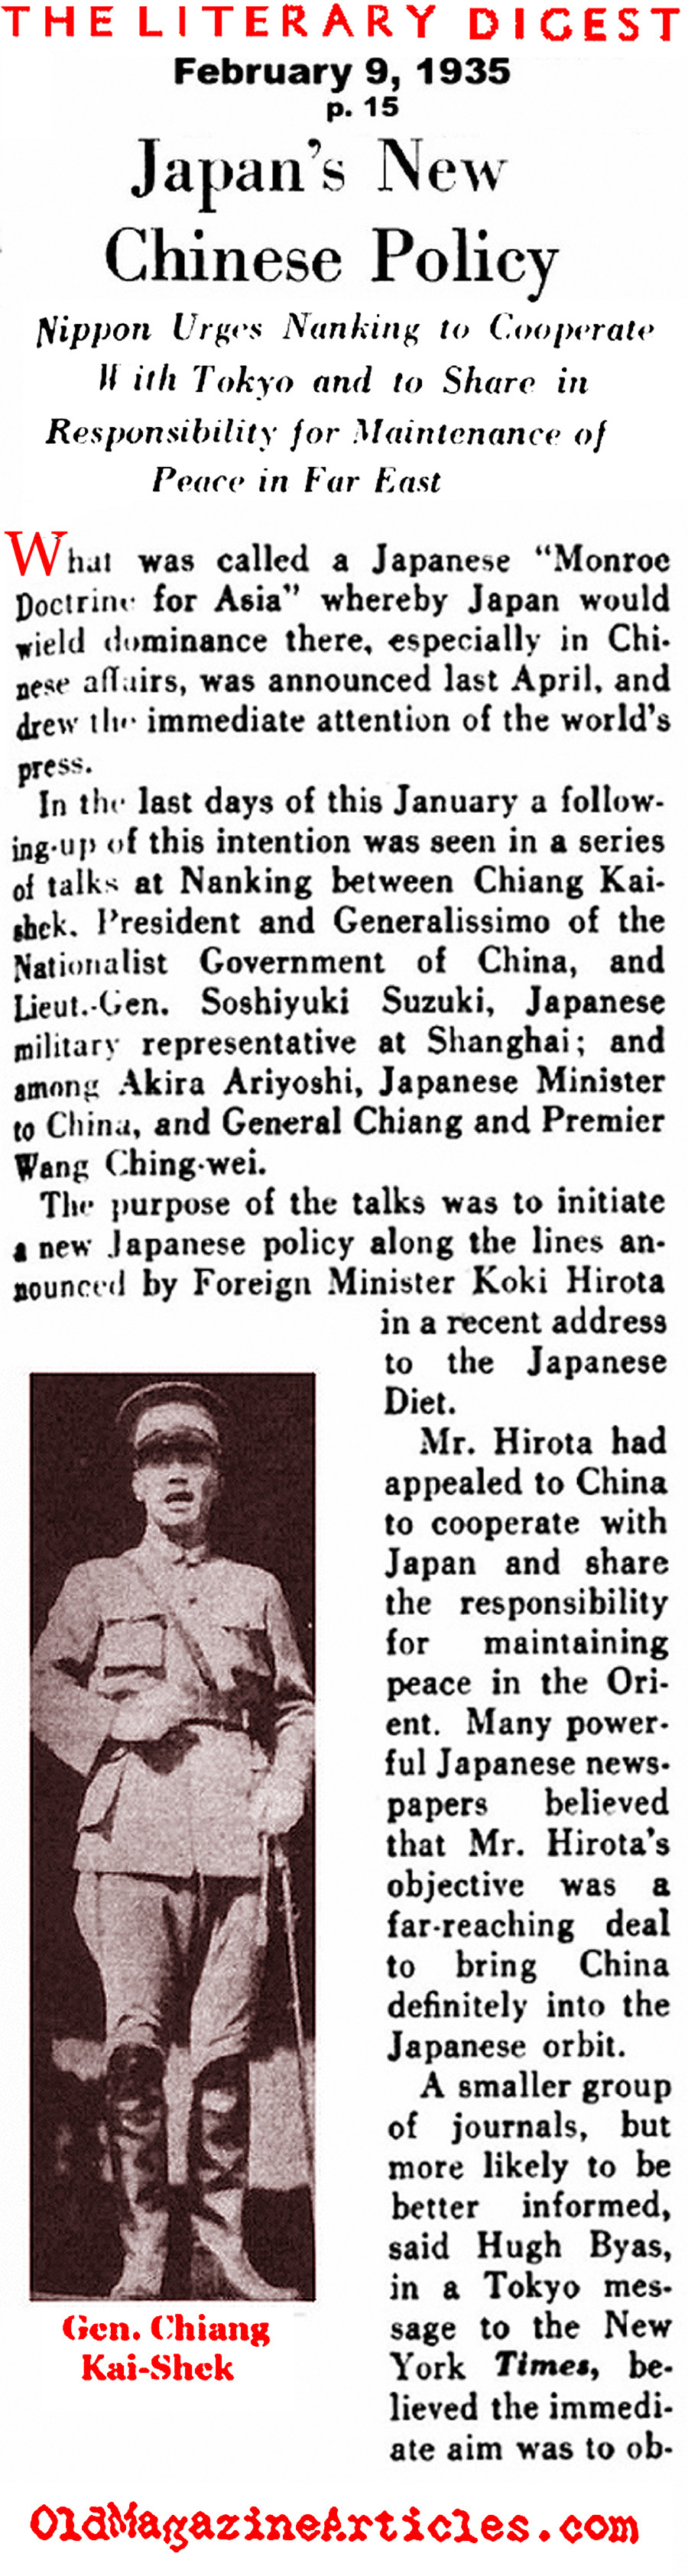 Japan's China Poicy (Literary Digest, 1935)